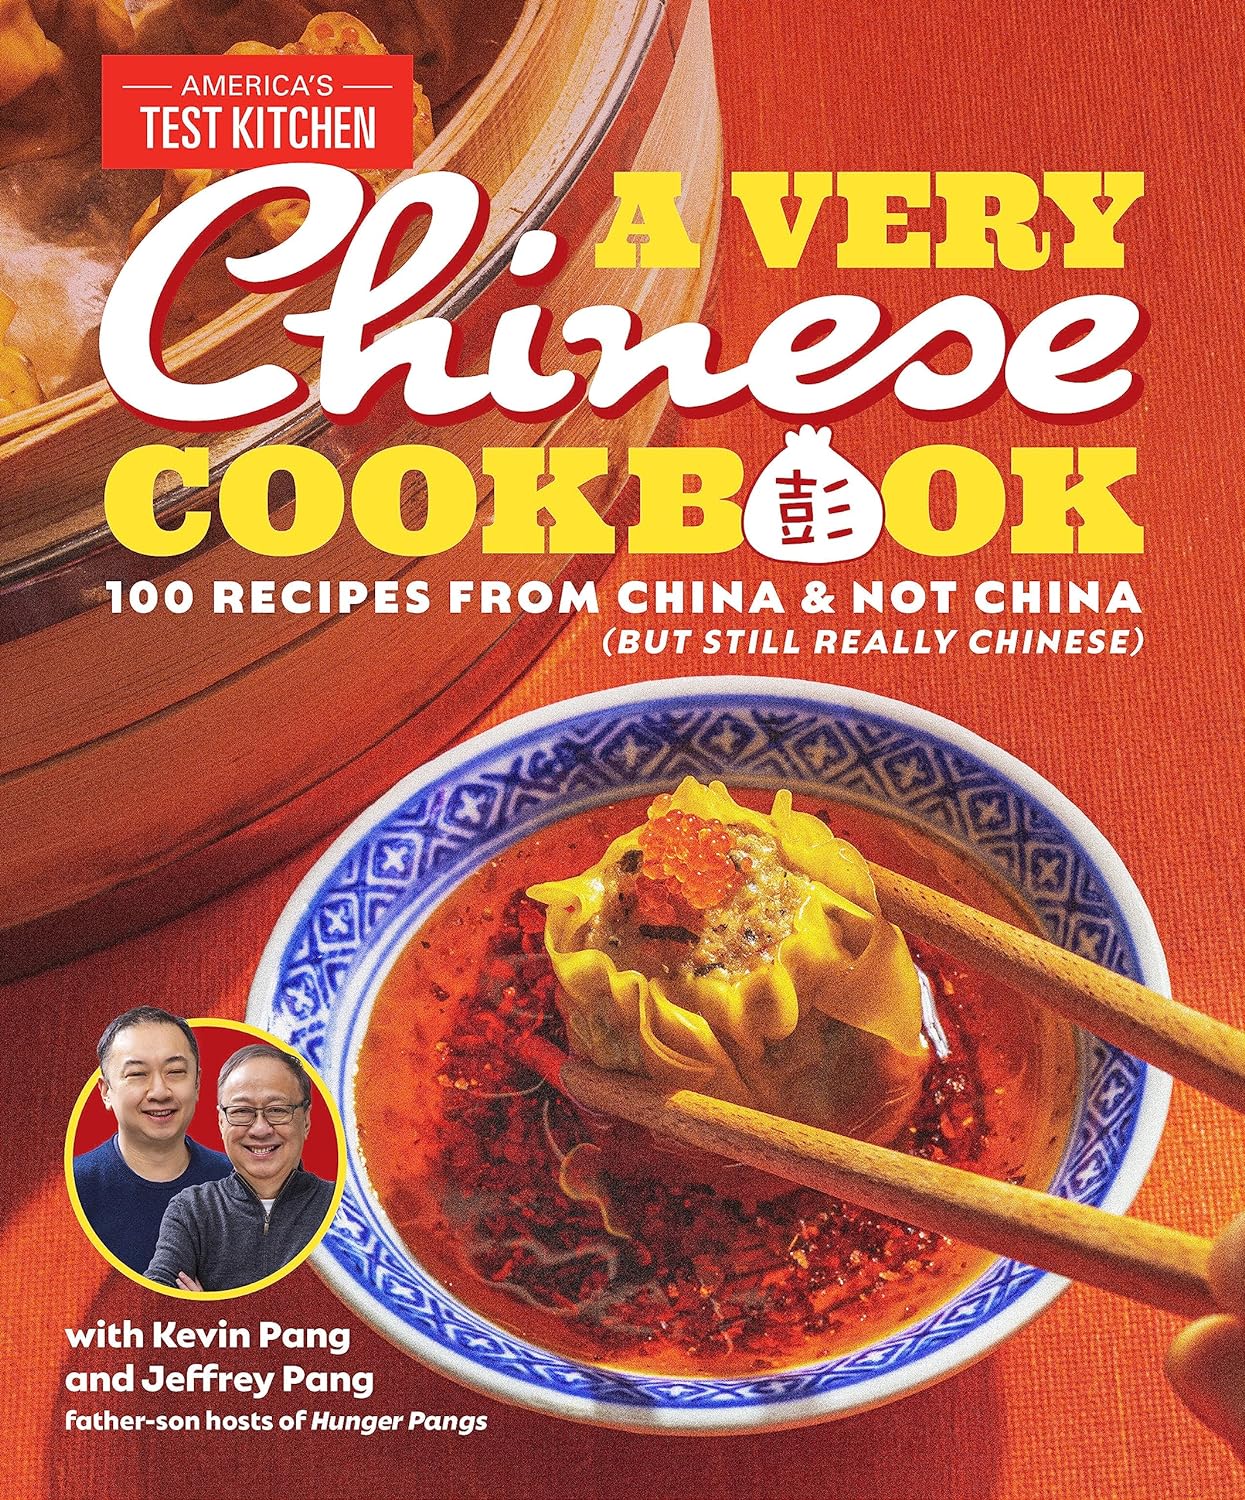 America's Text Kitchen - A Very Chinese Cookbook